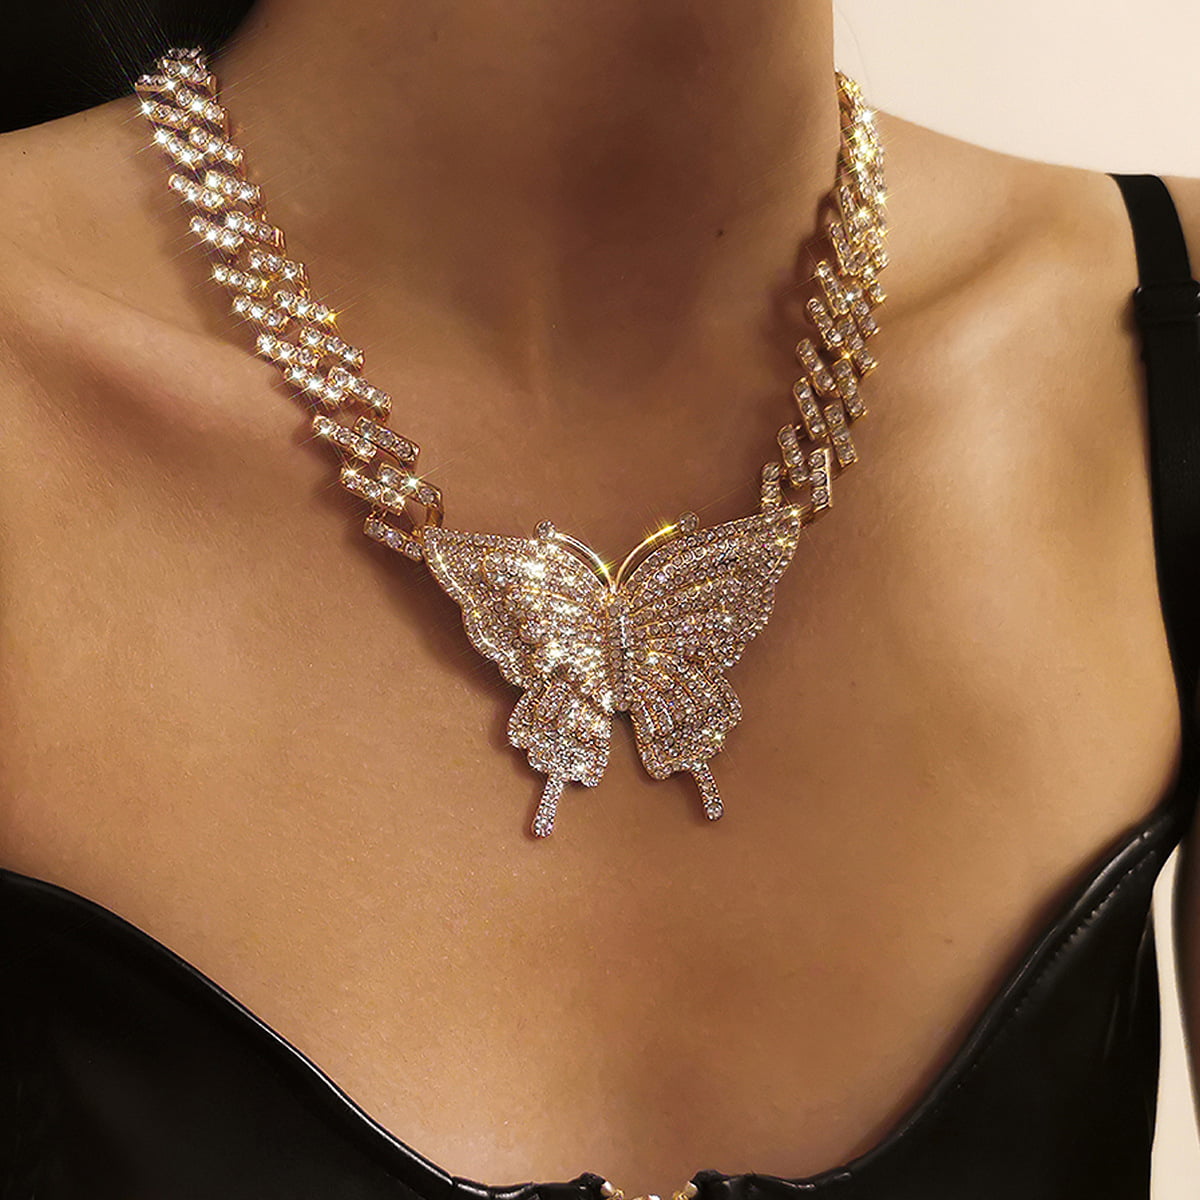 Sparkling Butterfly Diamond Butterfly Pendant With Rhinestone Accents  Elegant Crystal Charm Choker For Womens Jewelry Collection From Tjewelry,  $1.07